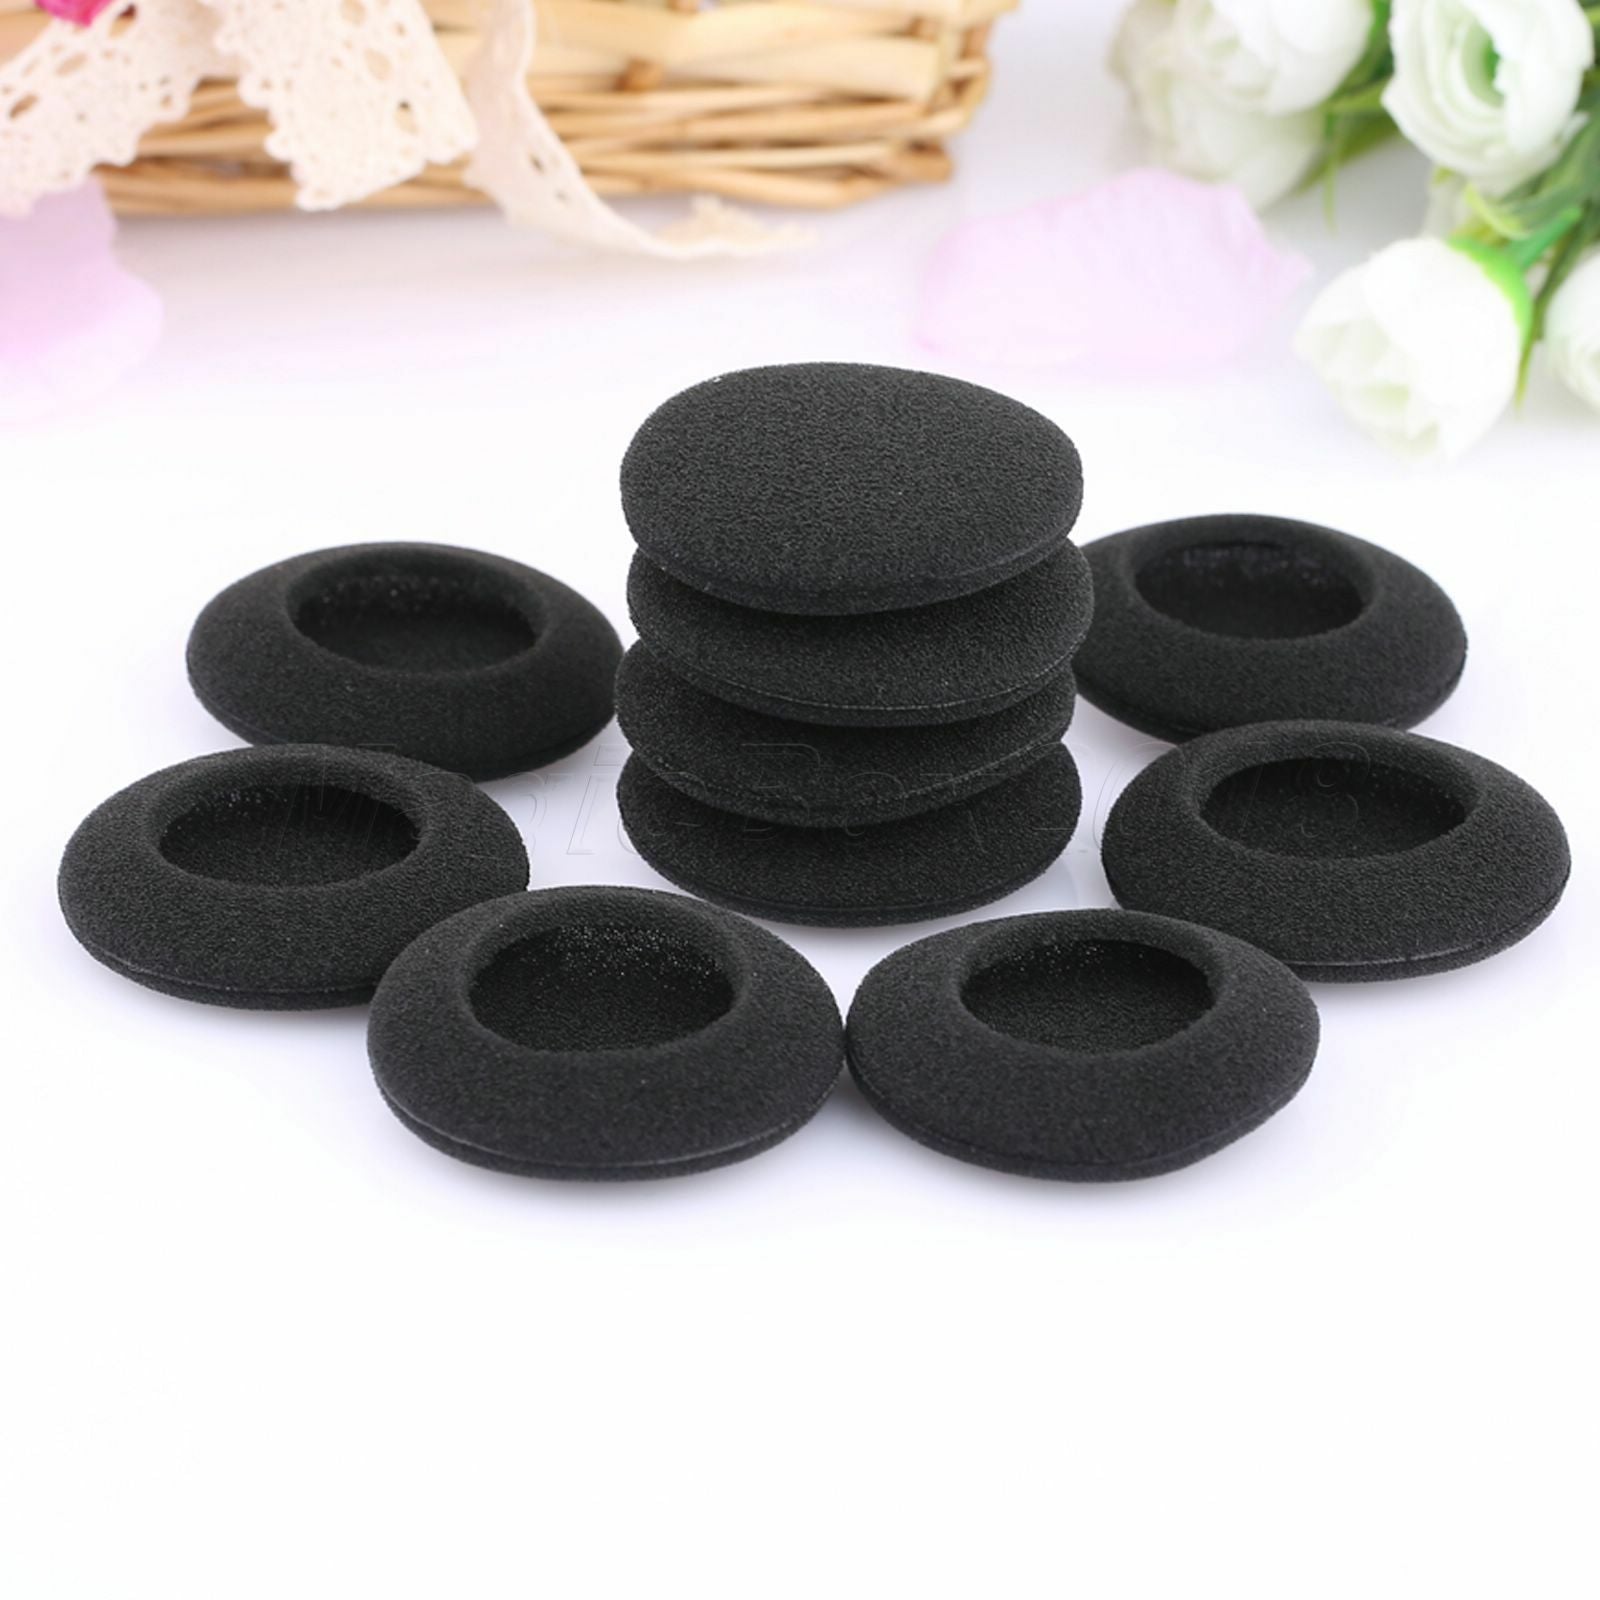 10X Replacement Headphone Pads 45mm Headset Foam Earpads Sponge Cover Cup 1.77"